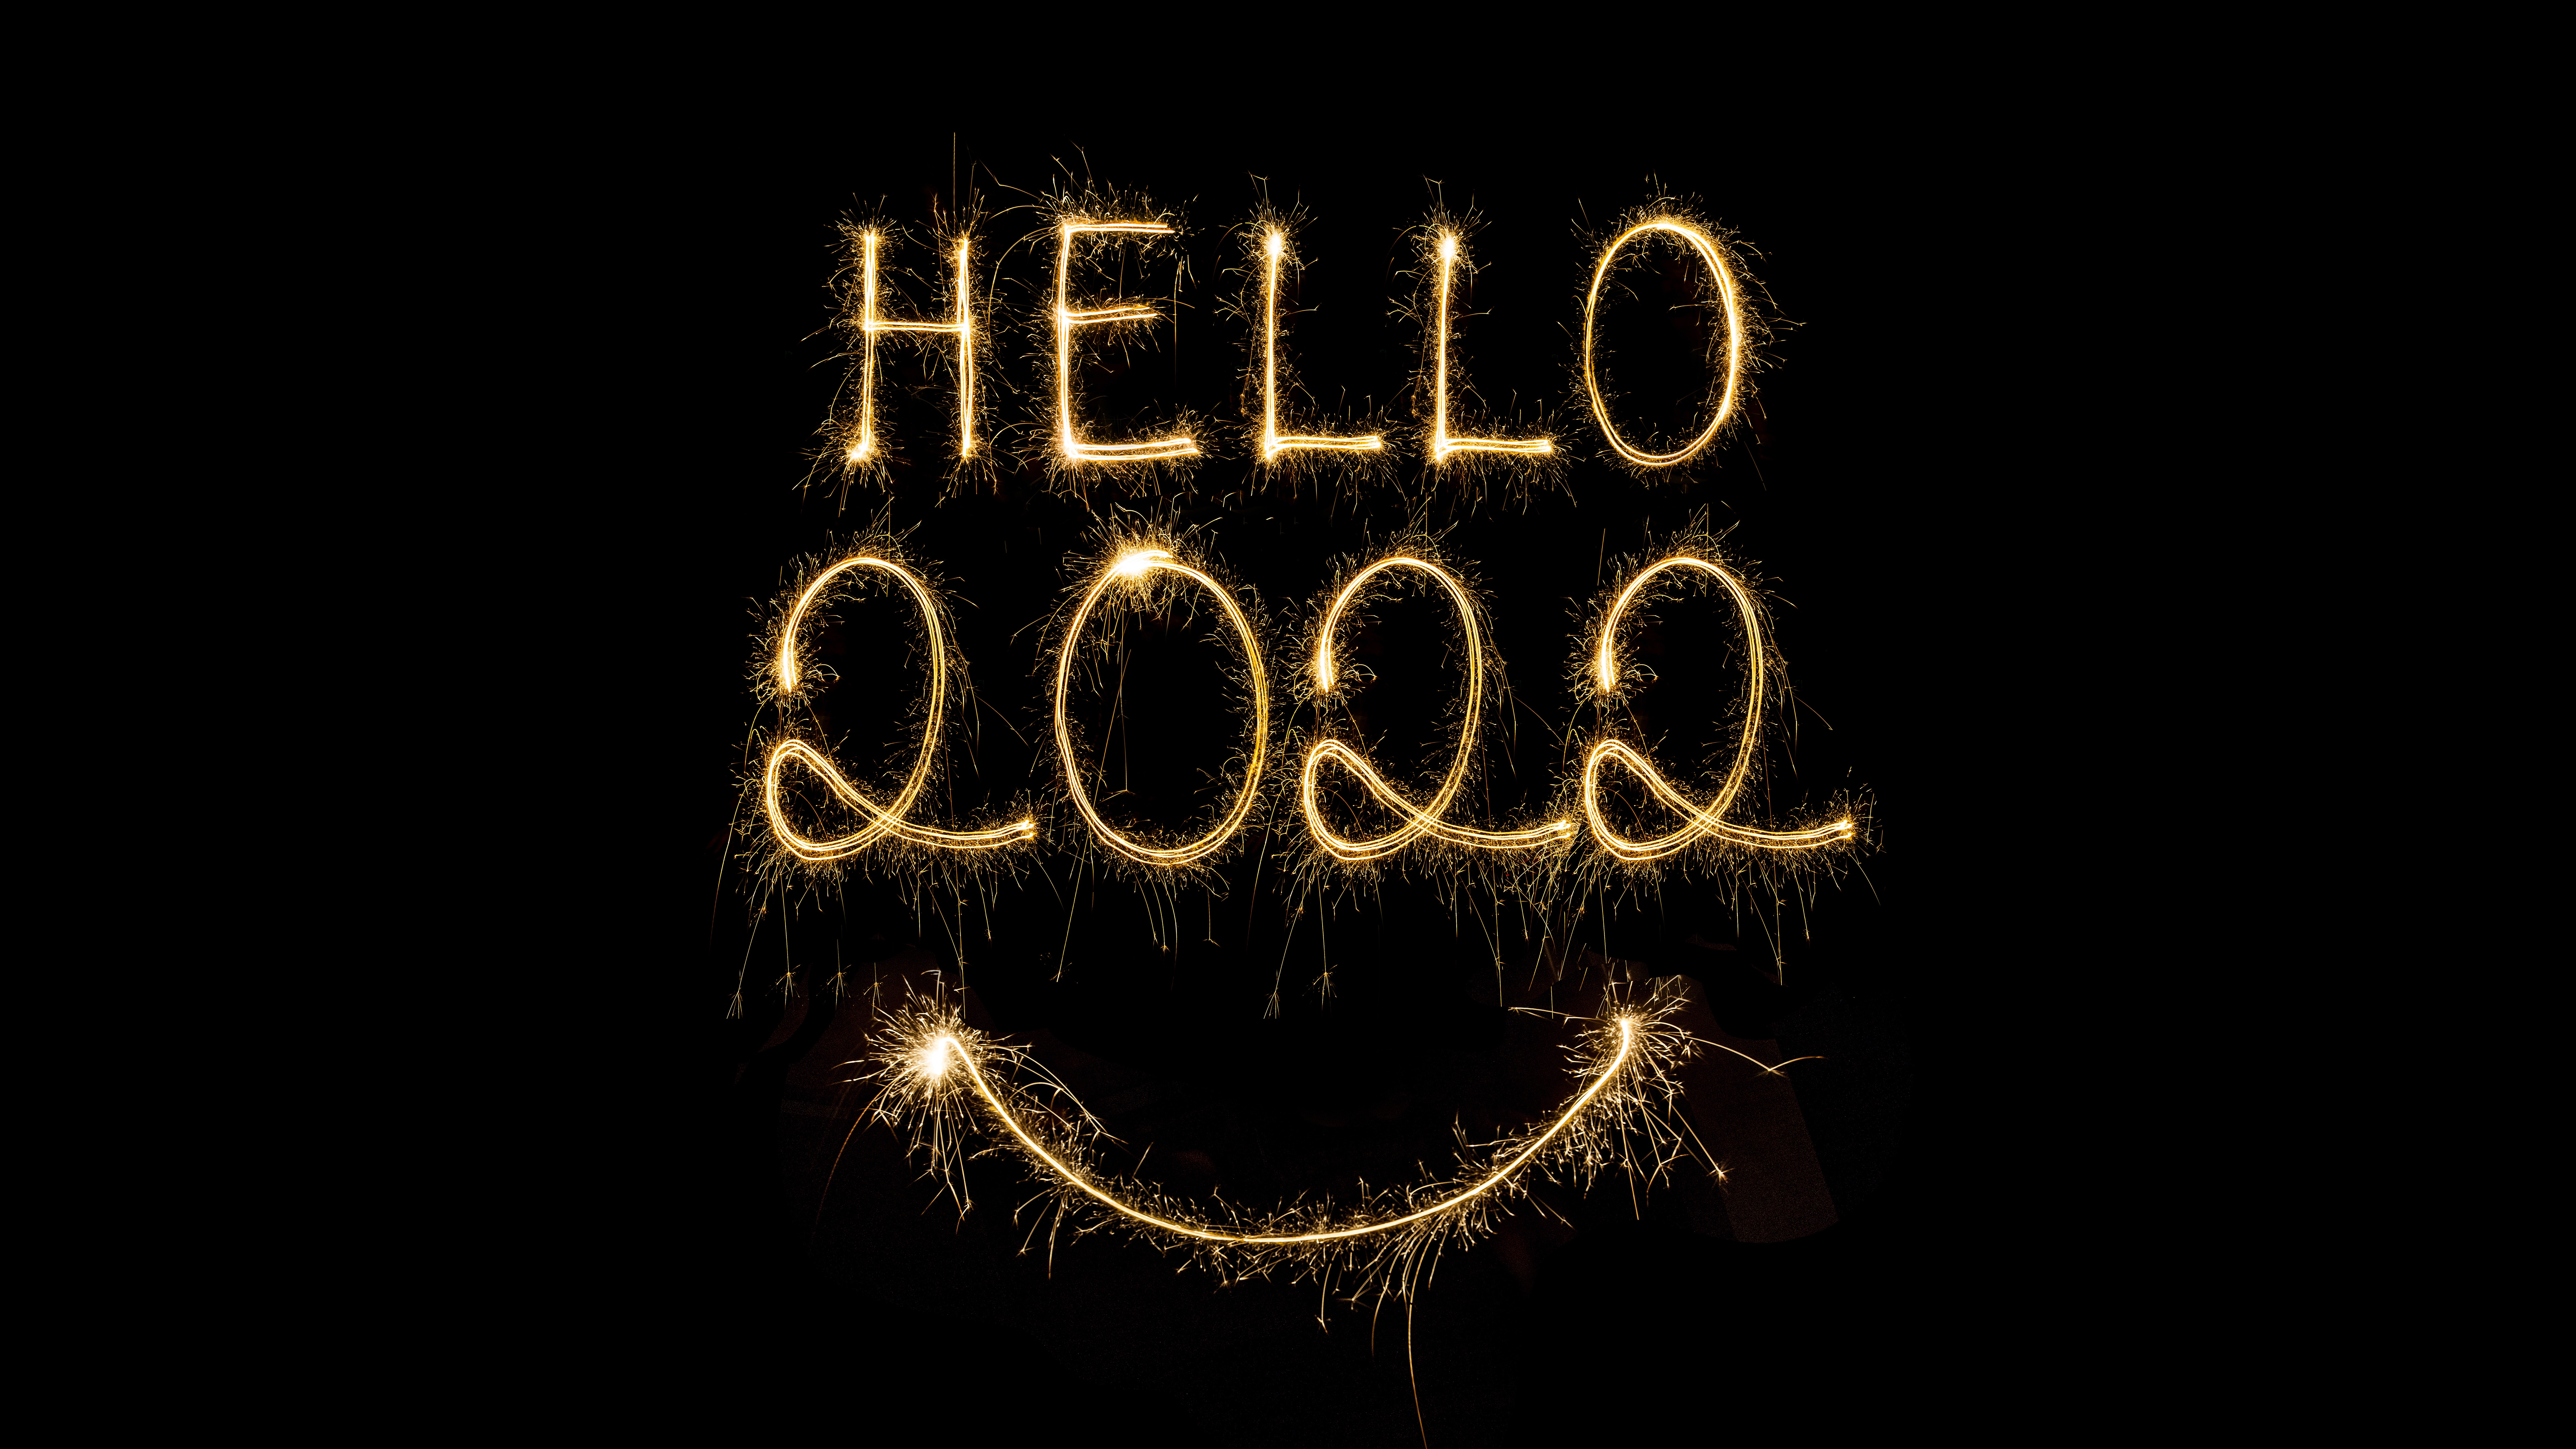 HD wallpaper, 5K, Smiley, Amoled, Sparklers, Sparkling, Fireworks, 2022 New Year, Happy New Year, Black Background